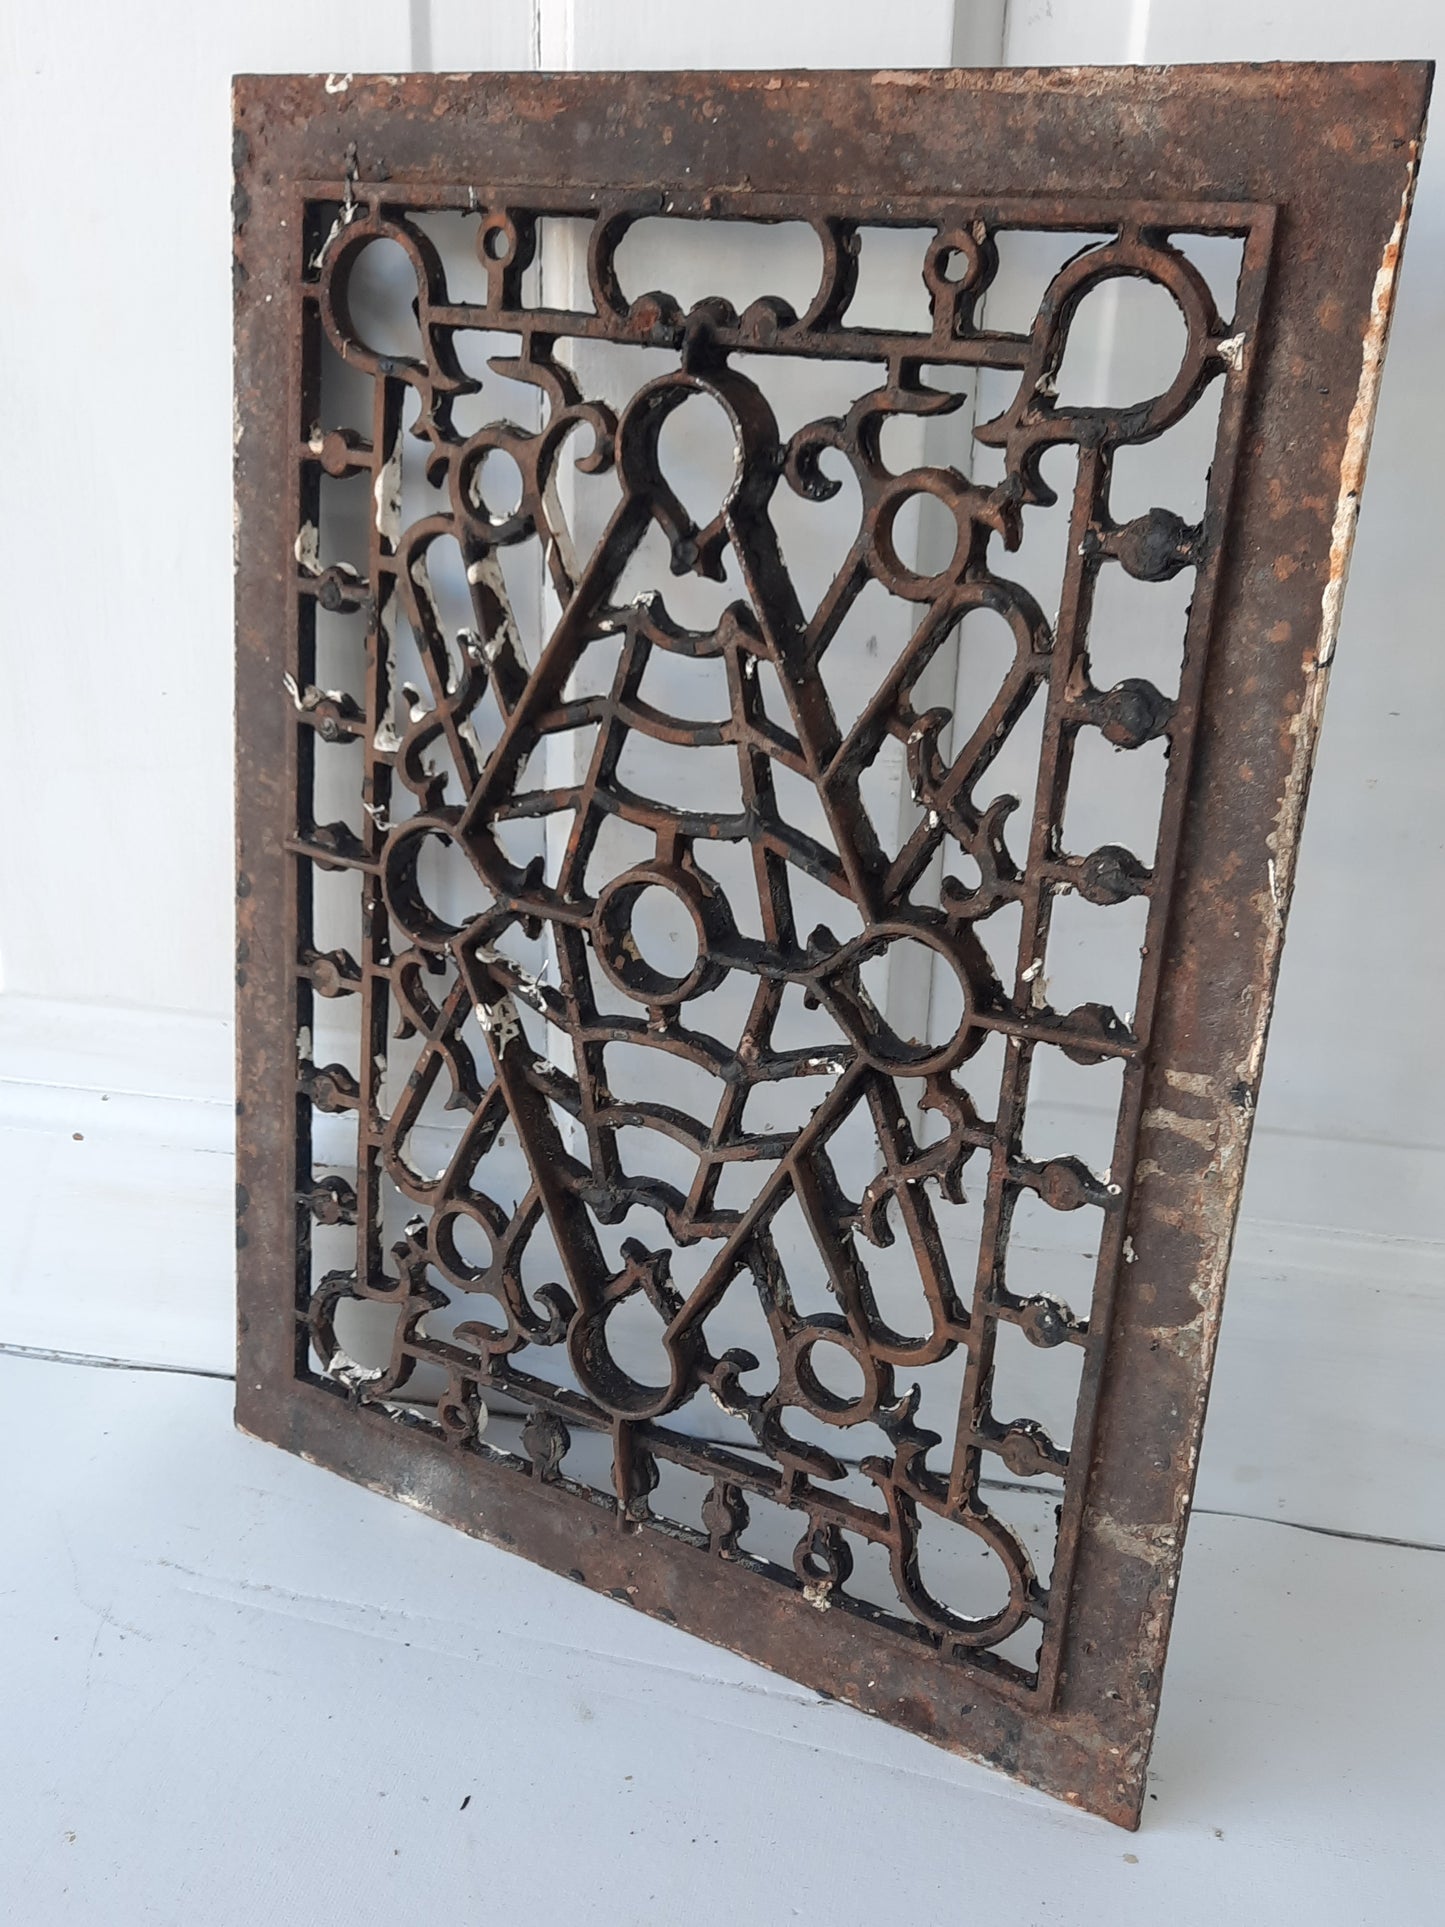 12 x 16 Antique Vent Cover Iron Register Cover, Scroll Pattern Ornate Grate 011105